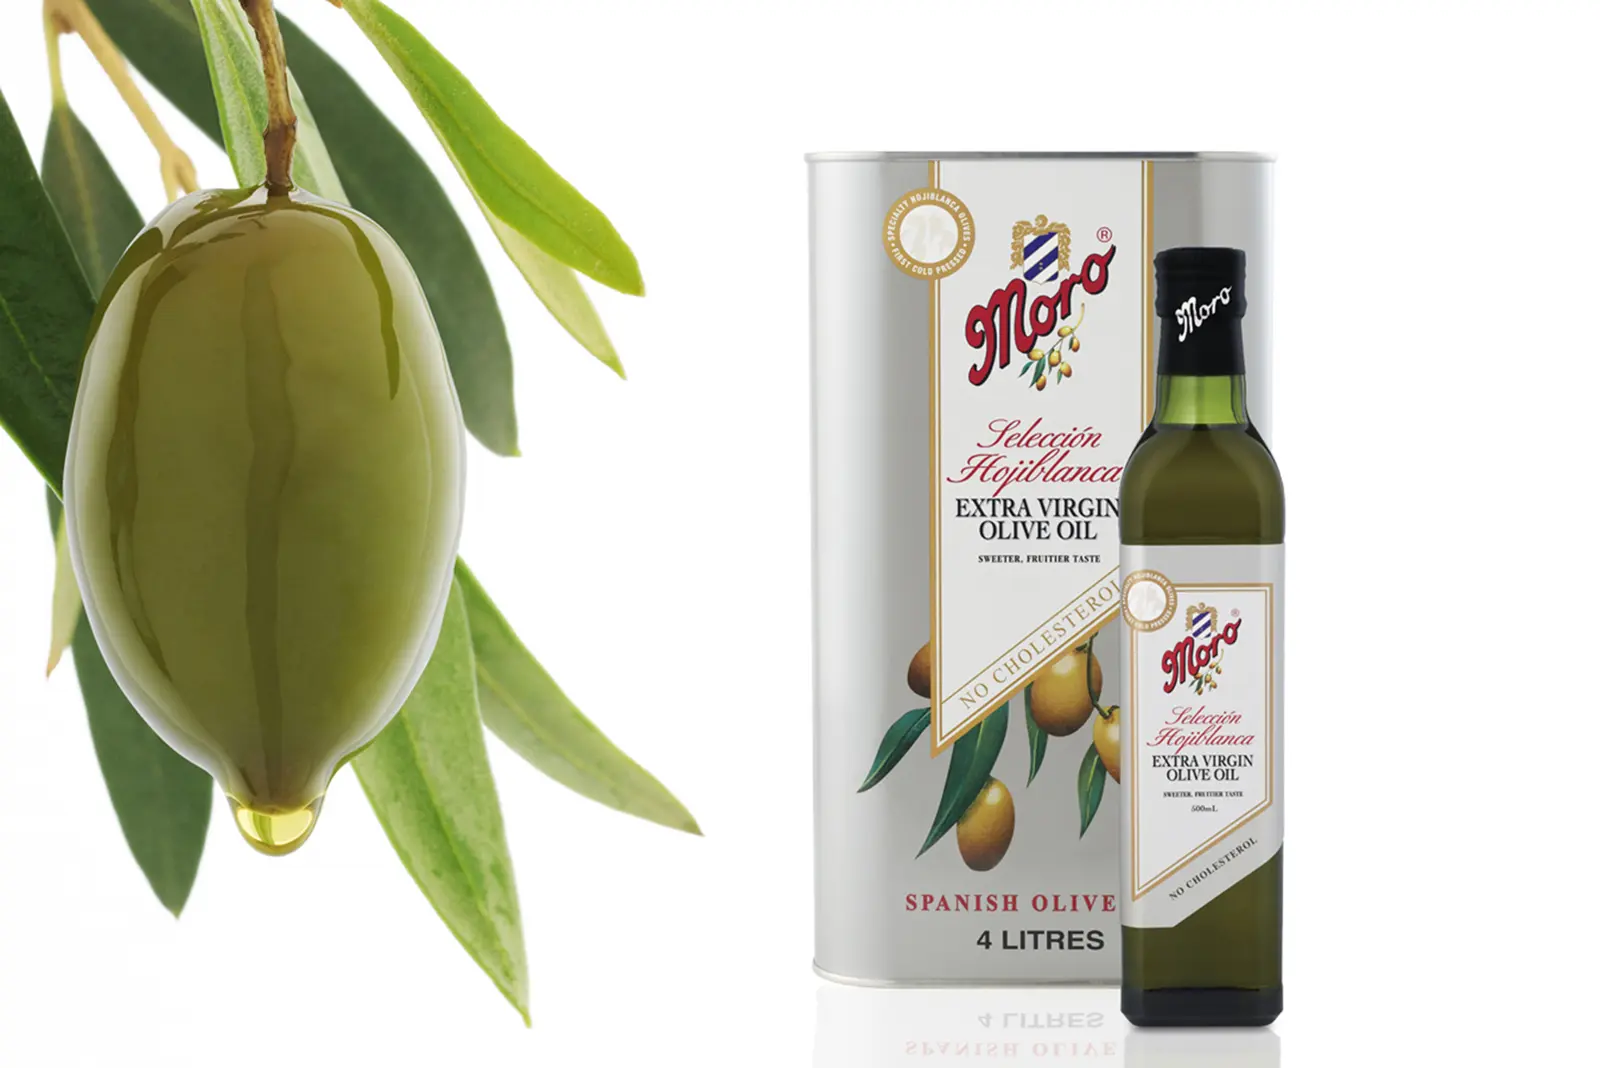 Launch campaign for Moro Olive Oil